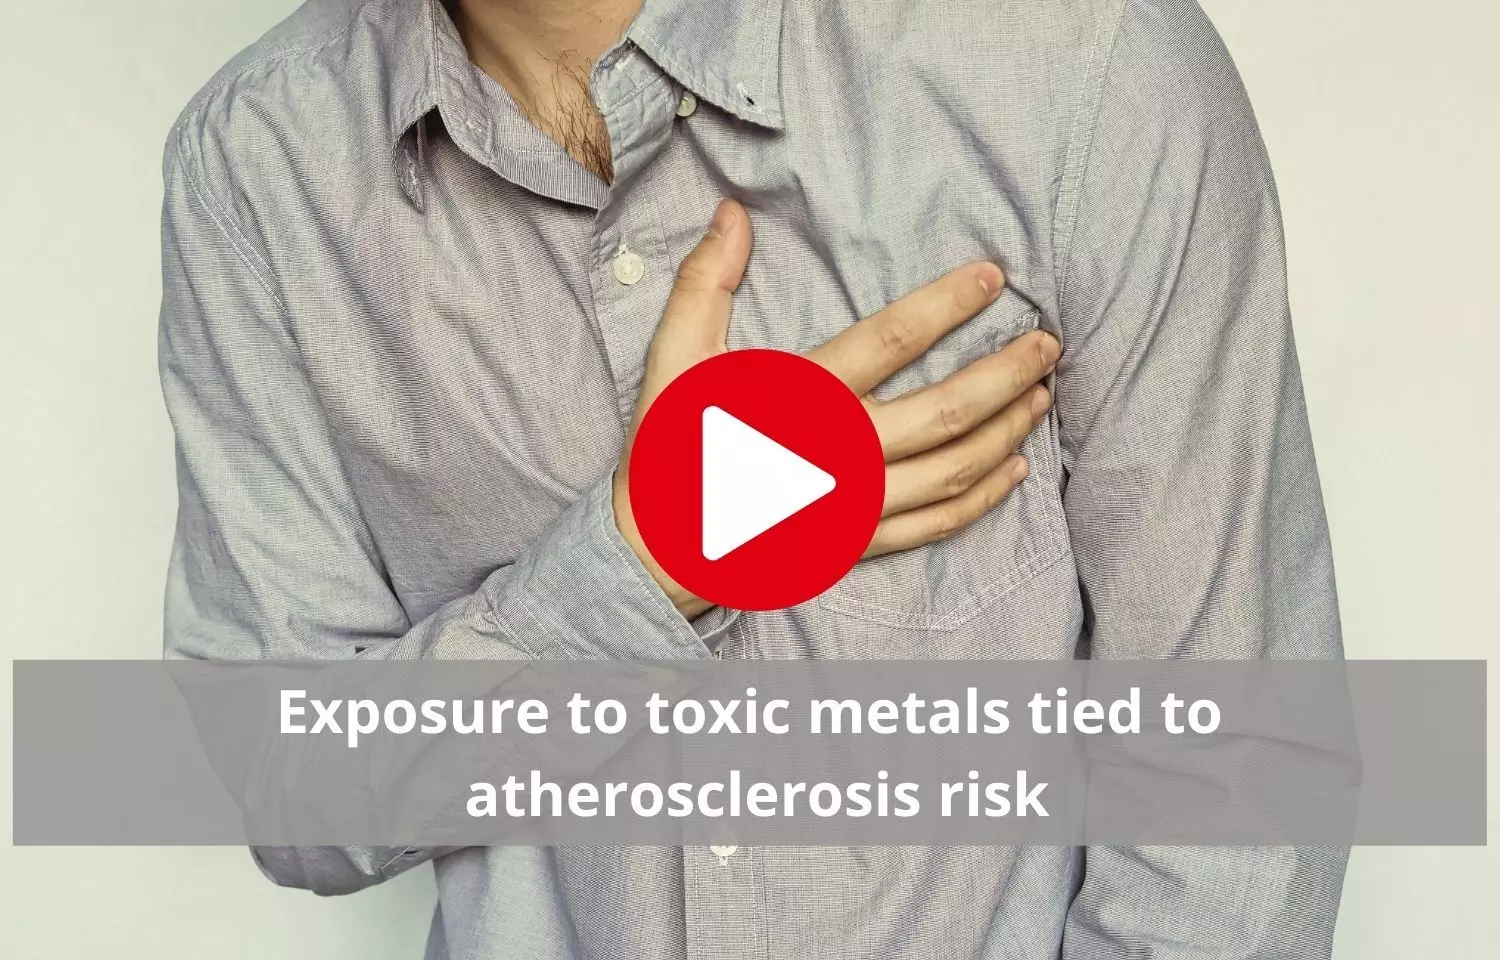 Toxic metal exposure can increase risk of developing atherosclerosis